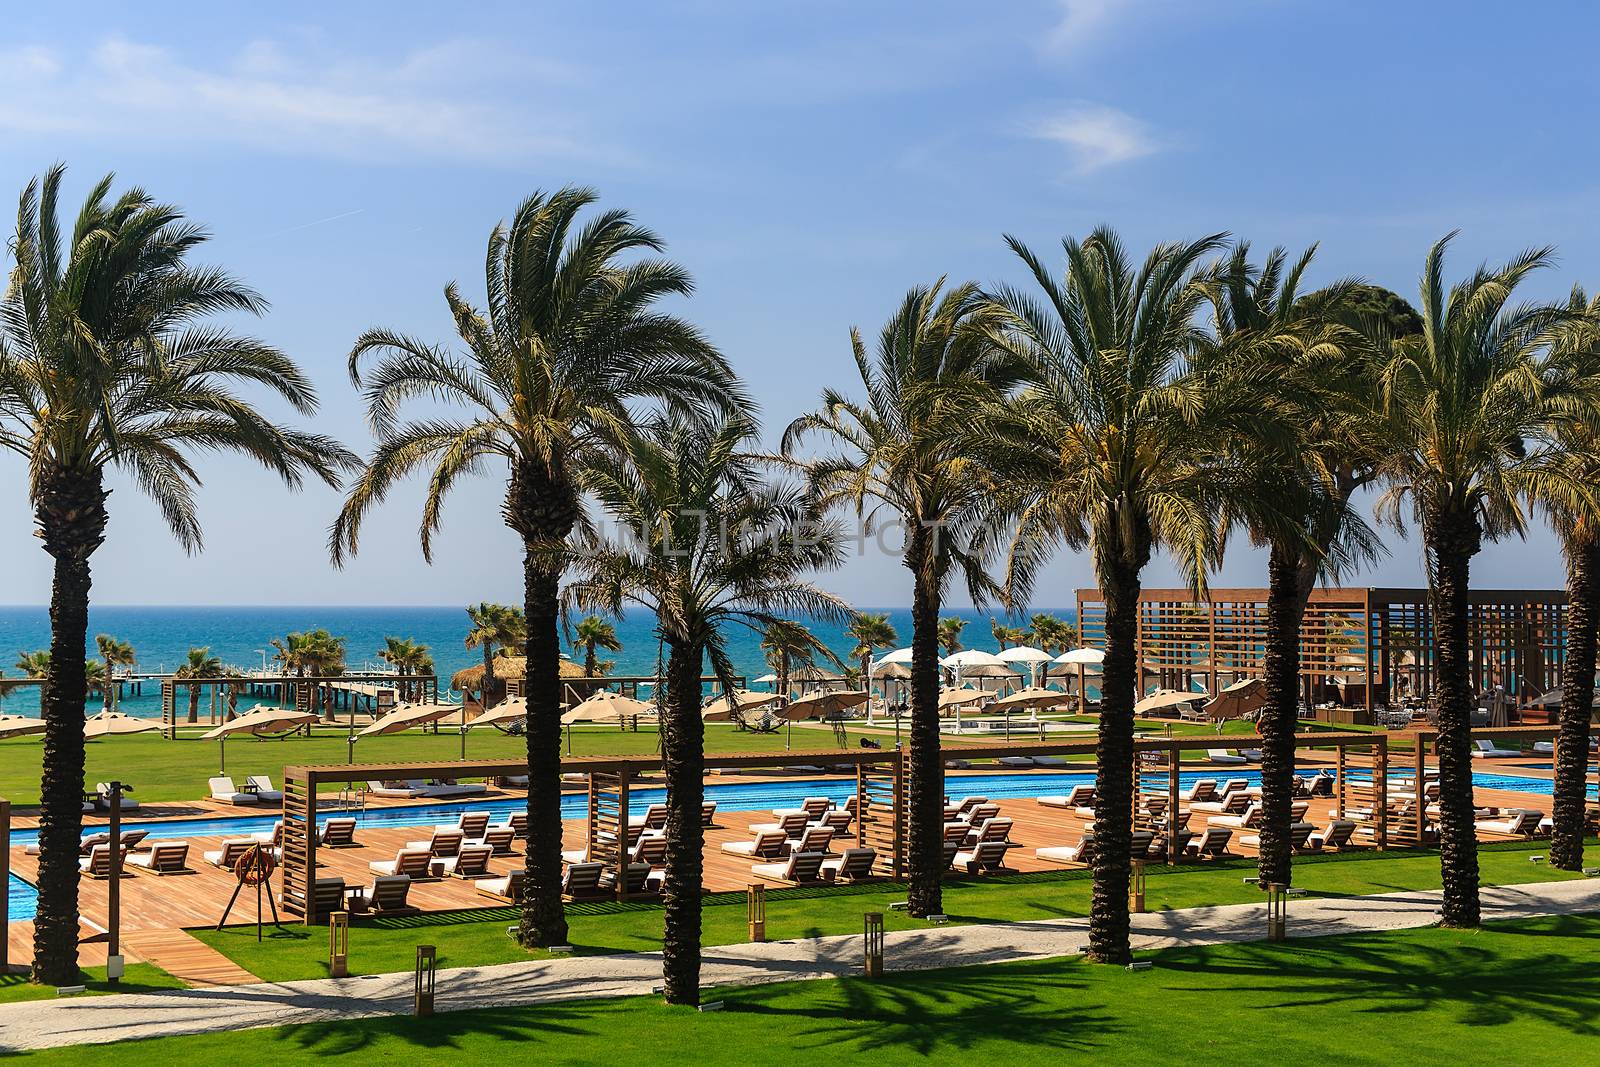 hotel grounds with swimming pool, clear blue sea and trees, summer Sunny day palm trees and sand by dikkens